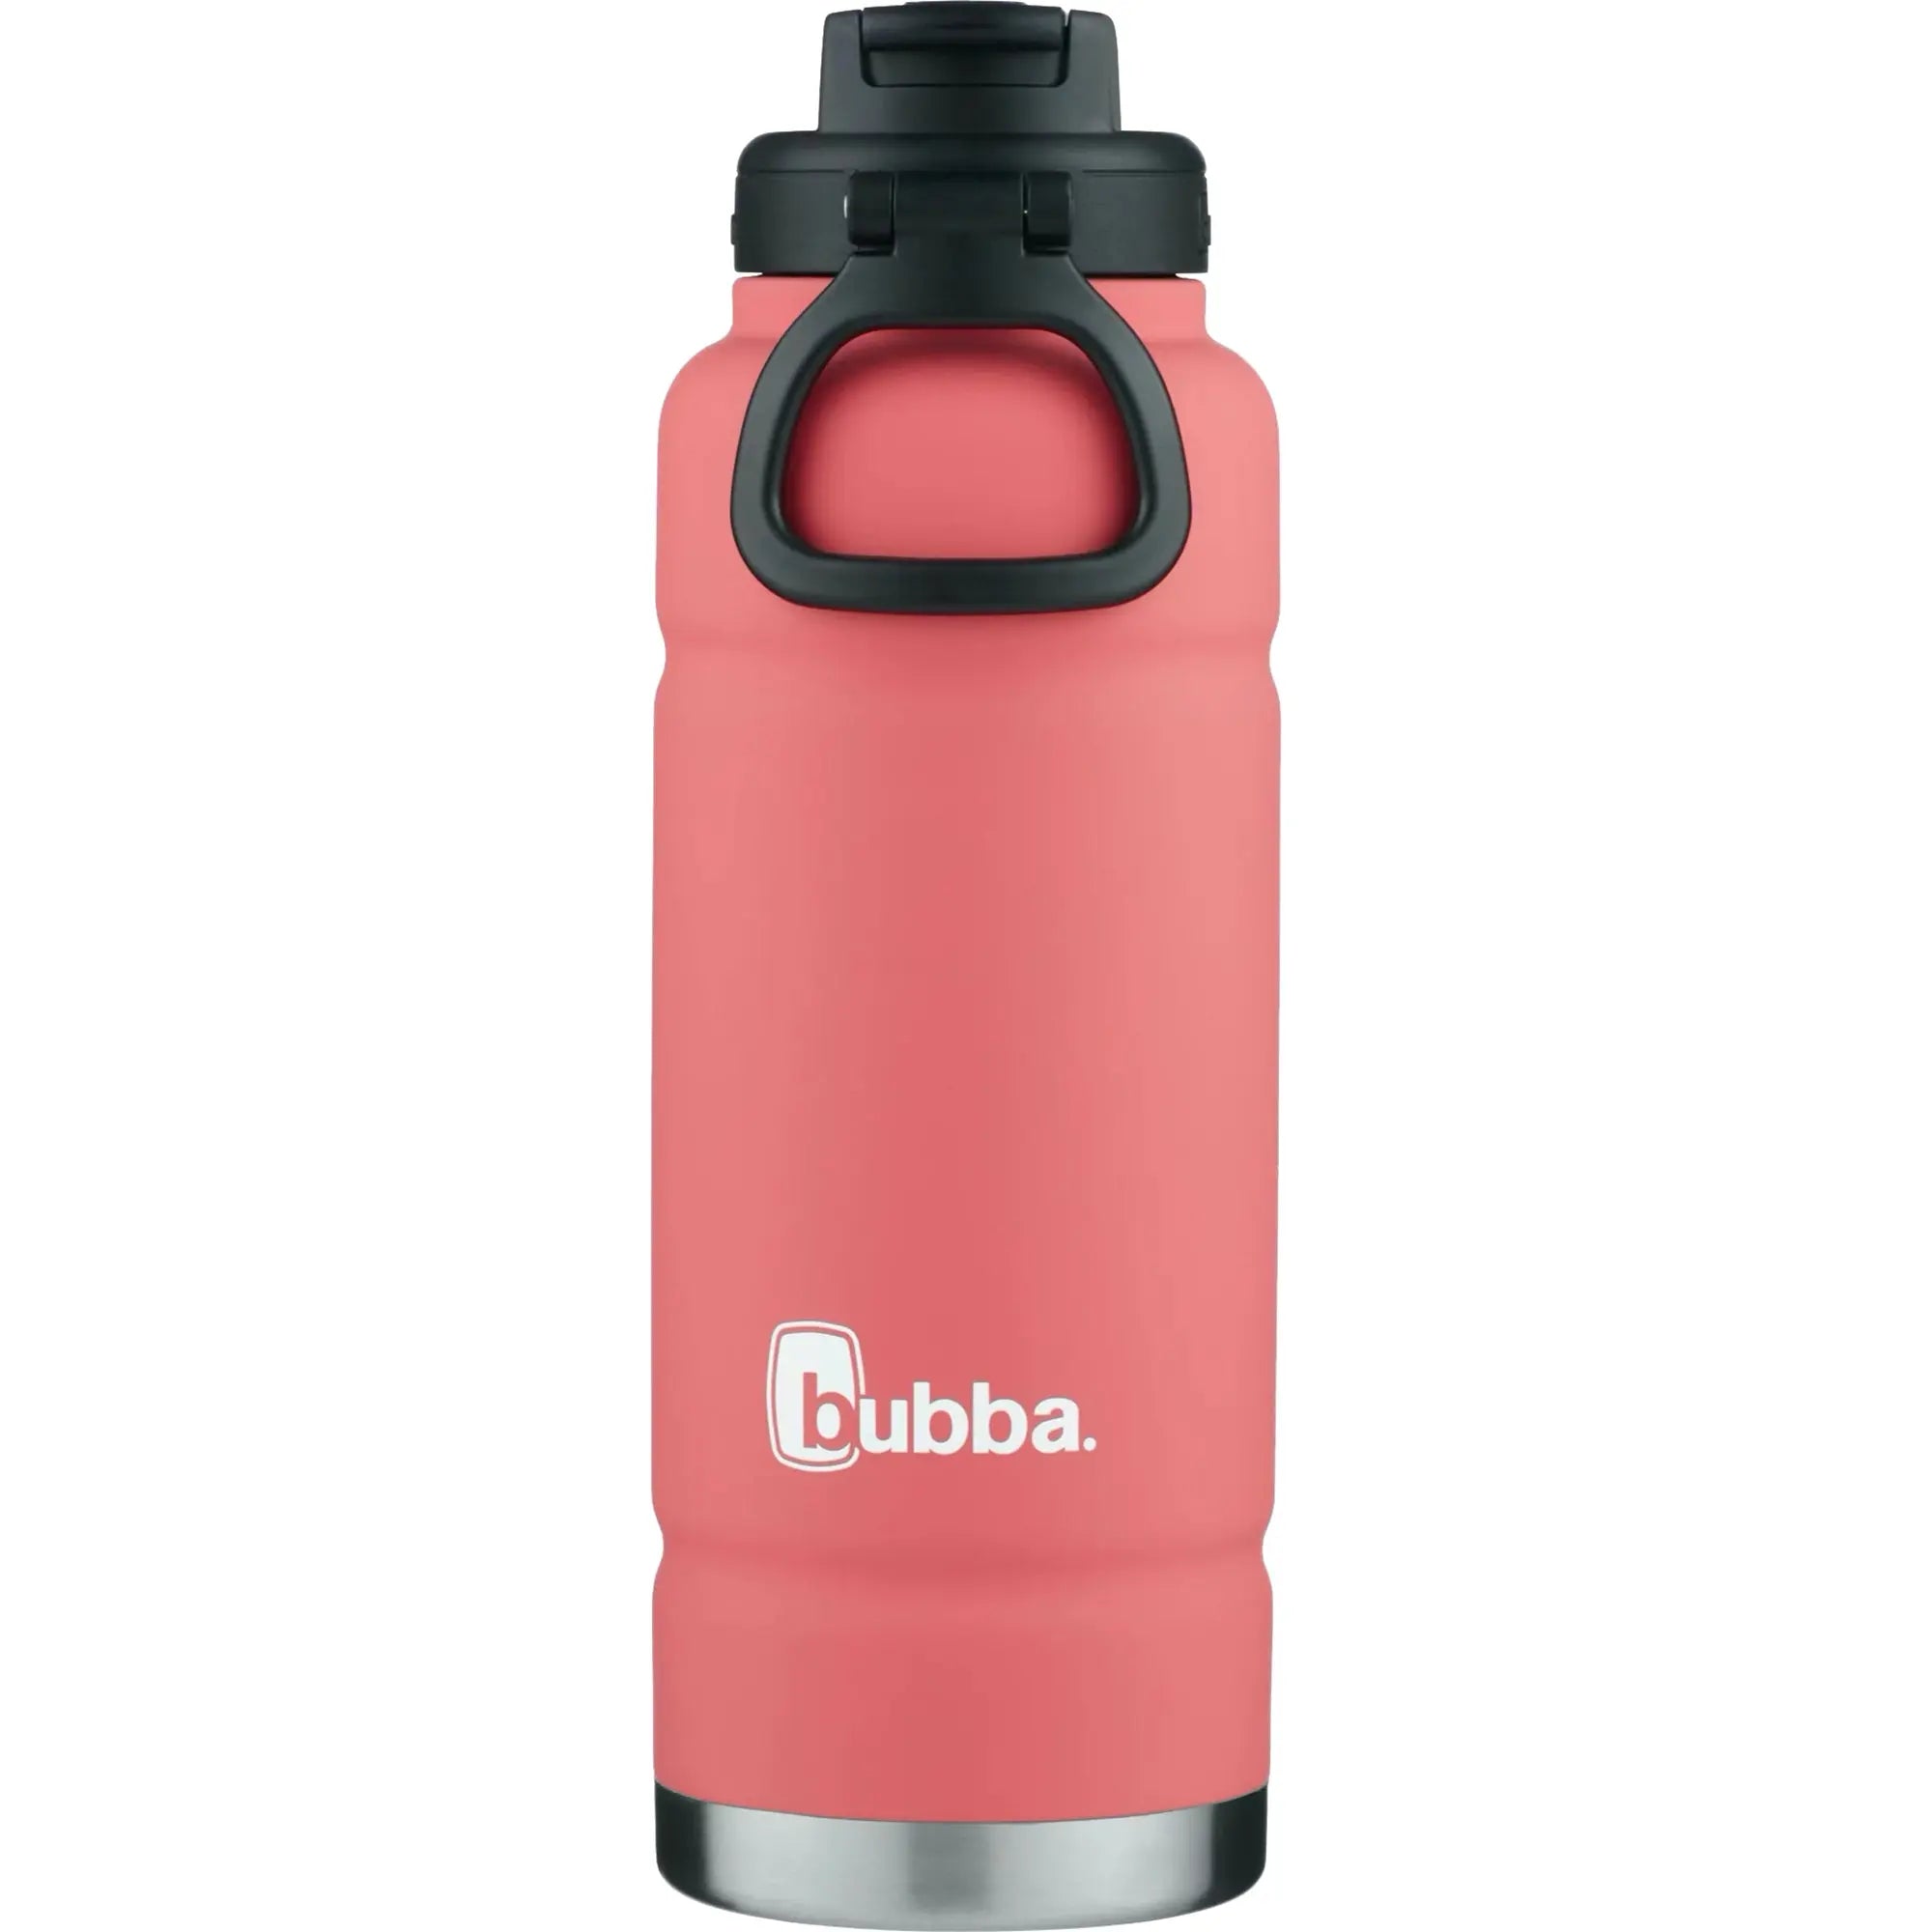 Bubba 40 oz. Trailblazer Insulated Stainless Steel Water Bottle - Electric Berry Bubba